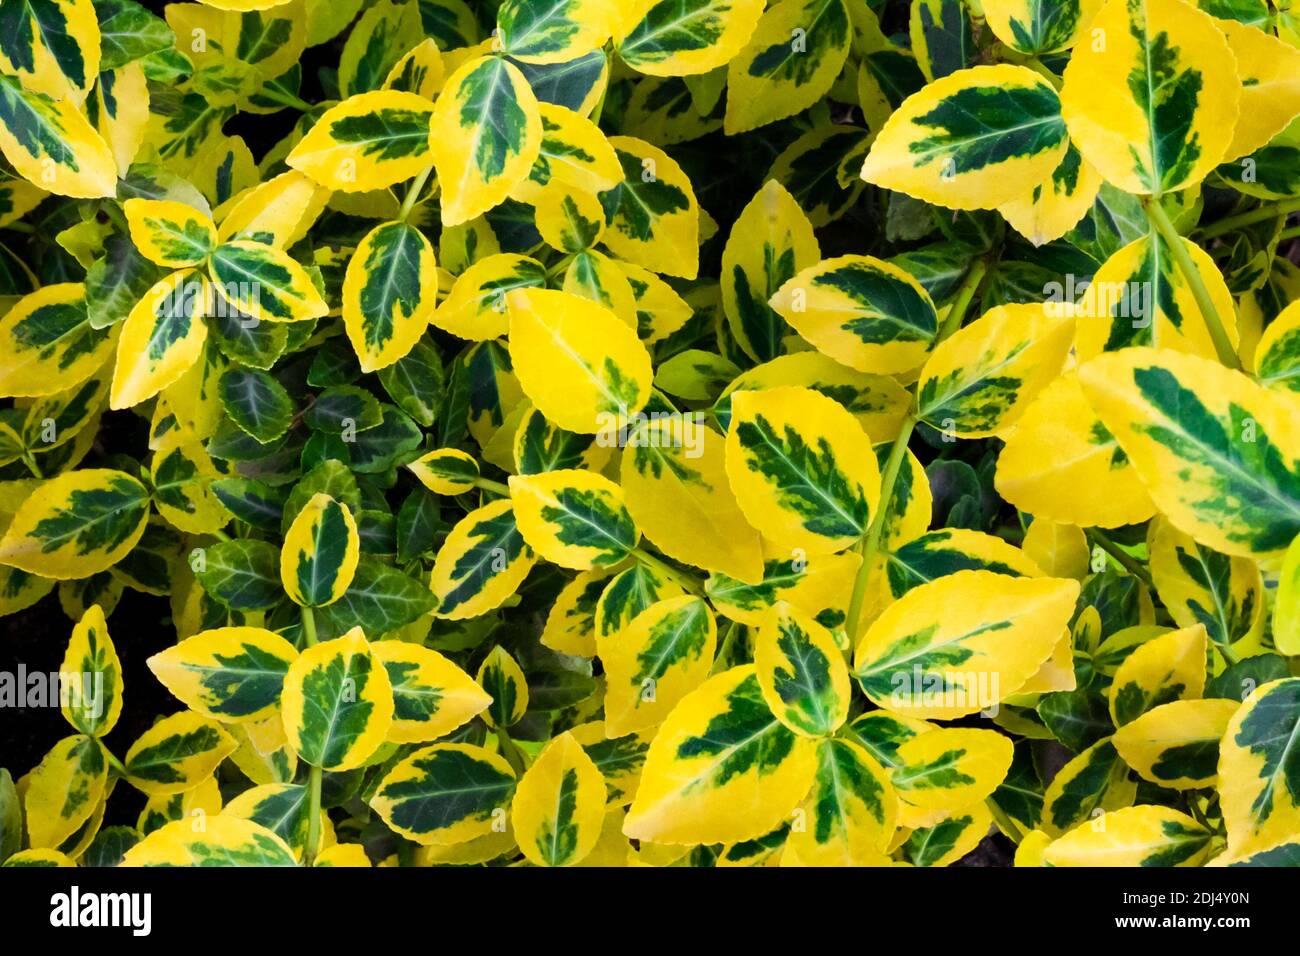 Branch of Euonymus fortunei (common names spindle or Fortune's spindle, winter creeper or wintercreeper), variegated cultivar 'Emerald 'n' Gold' close Stock Photo